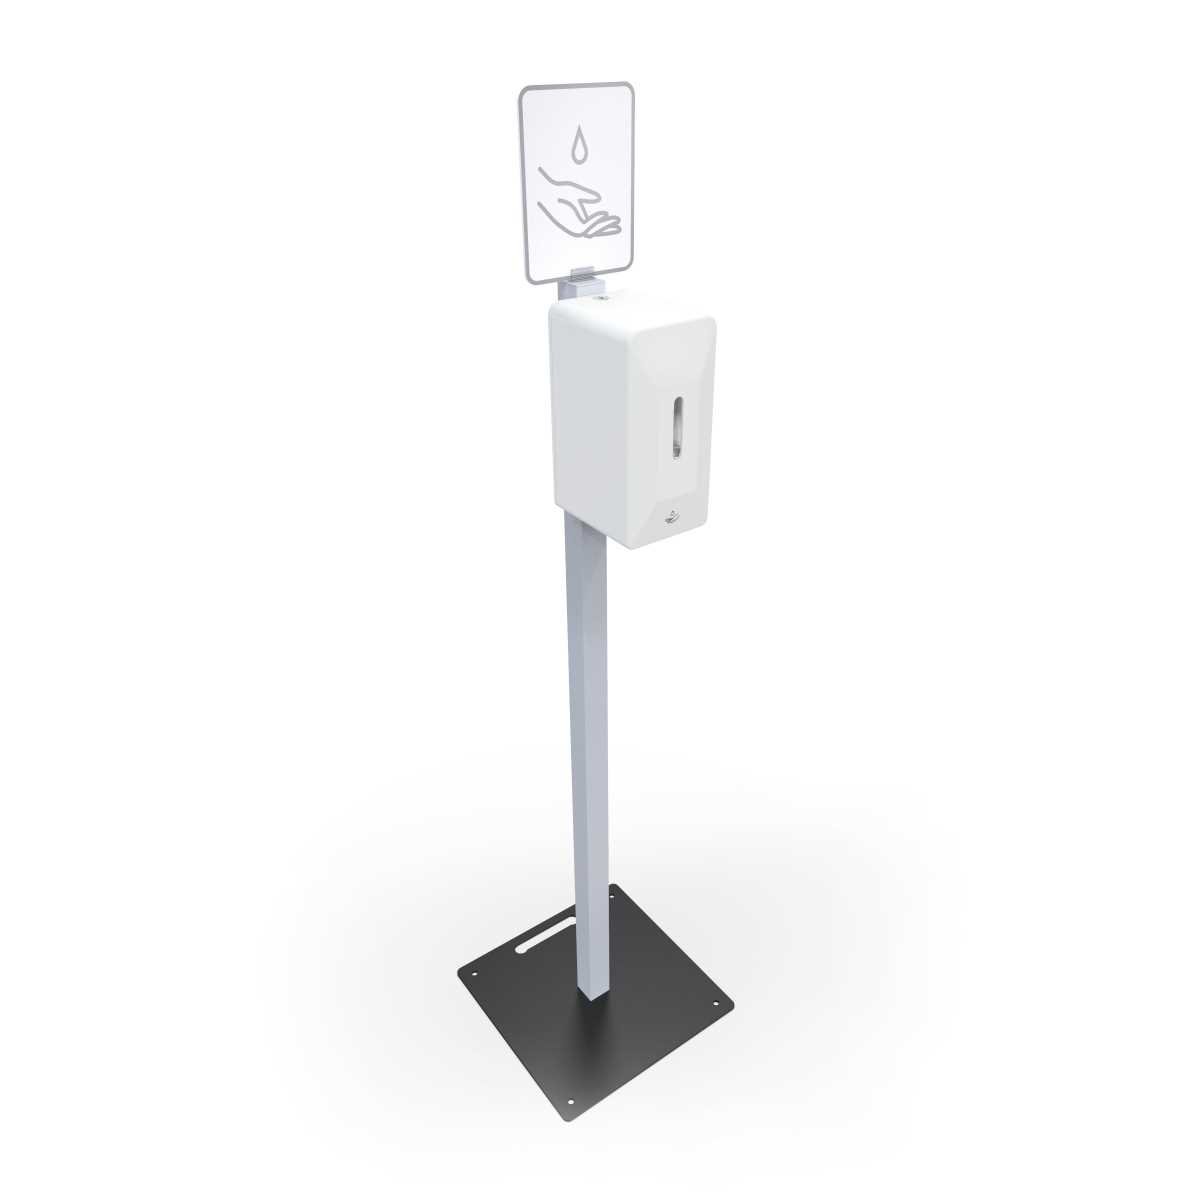 Free automatic standing hand sanitiser dispenser, aluminium stand,  free UK delivery. www.ontimeprint.co.uk